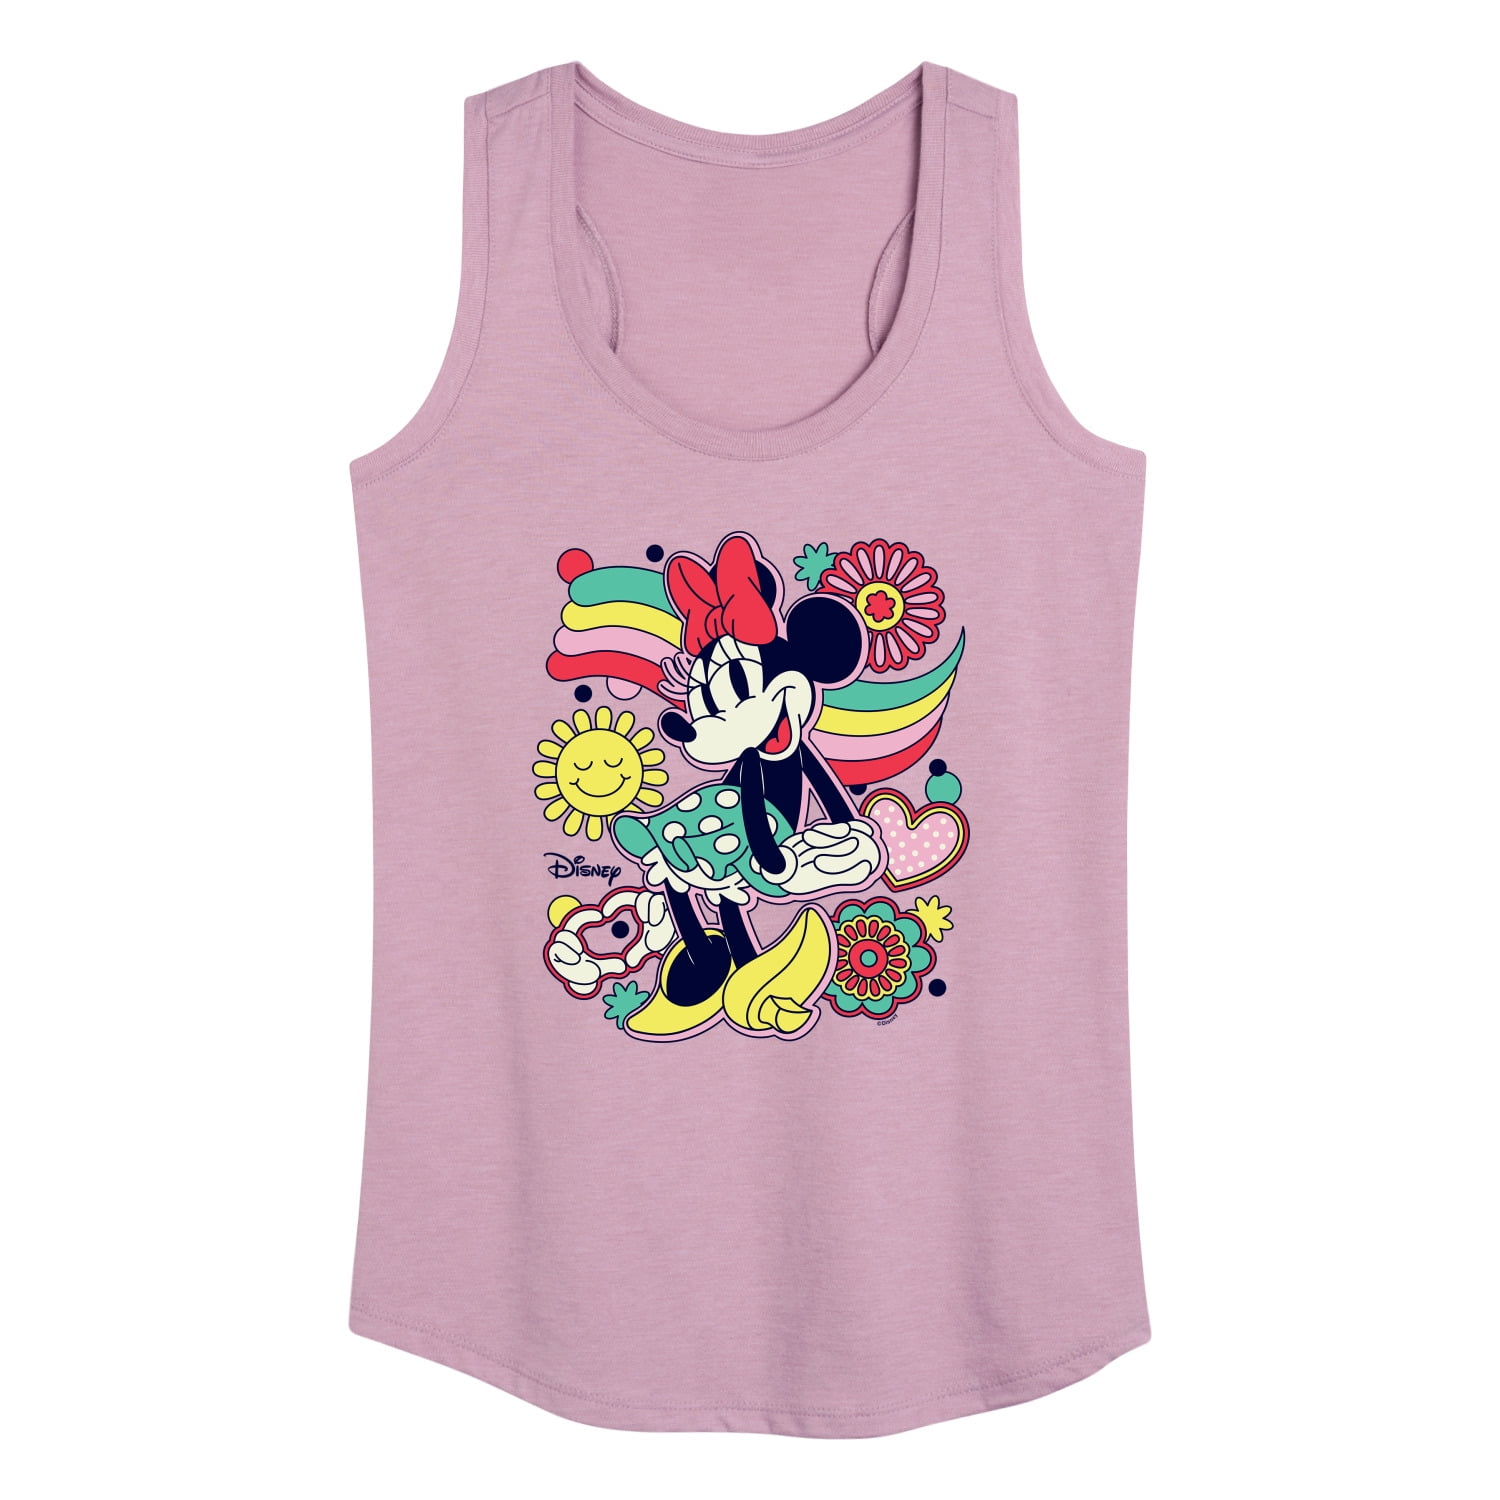 Women's Mickey & Friends Smiling Minnie Mouse Portrait Racerback Tank Top  White Heather X Small